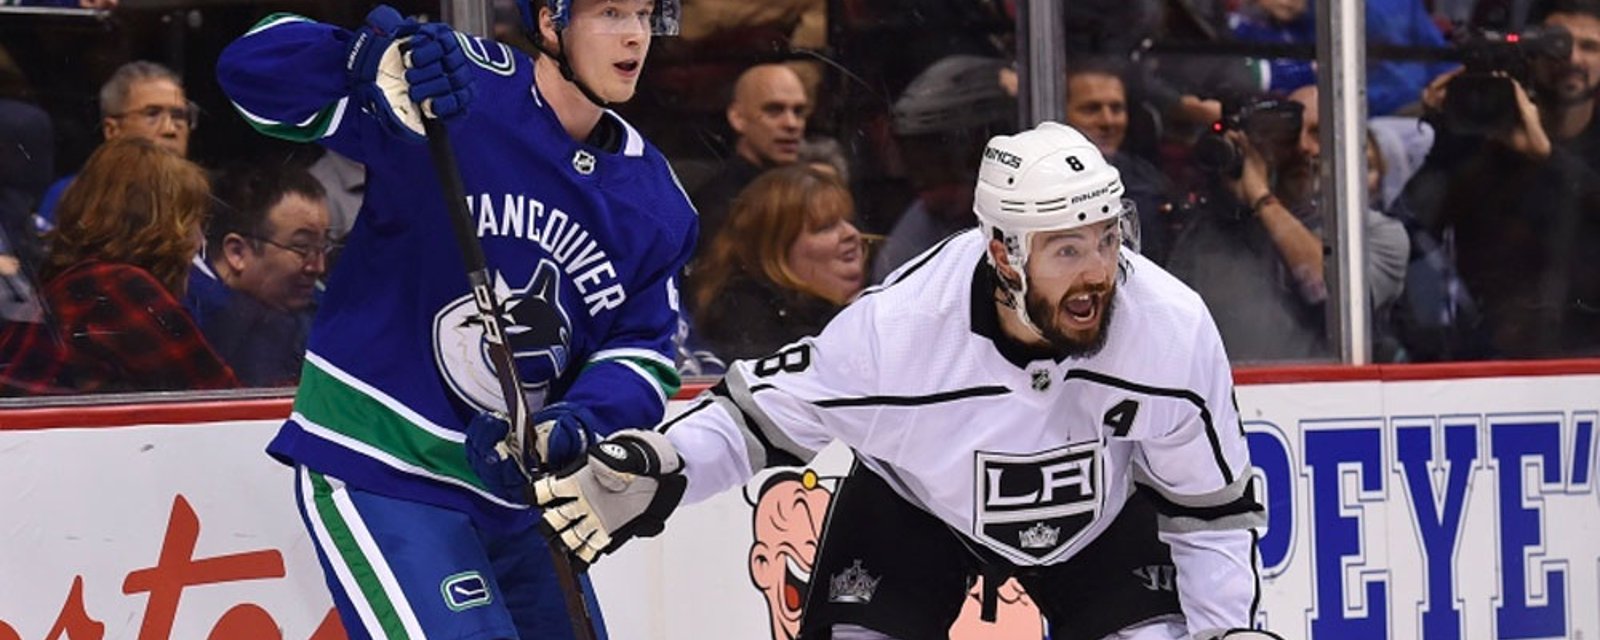 Doughty goes off on Canucks after embarrassing 8-2 loss